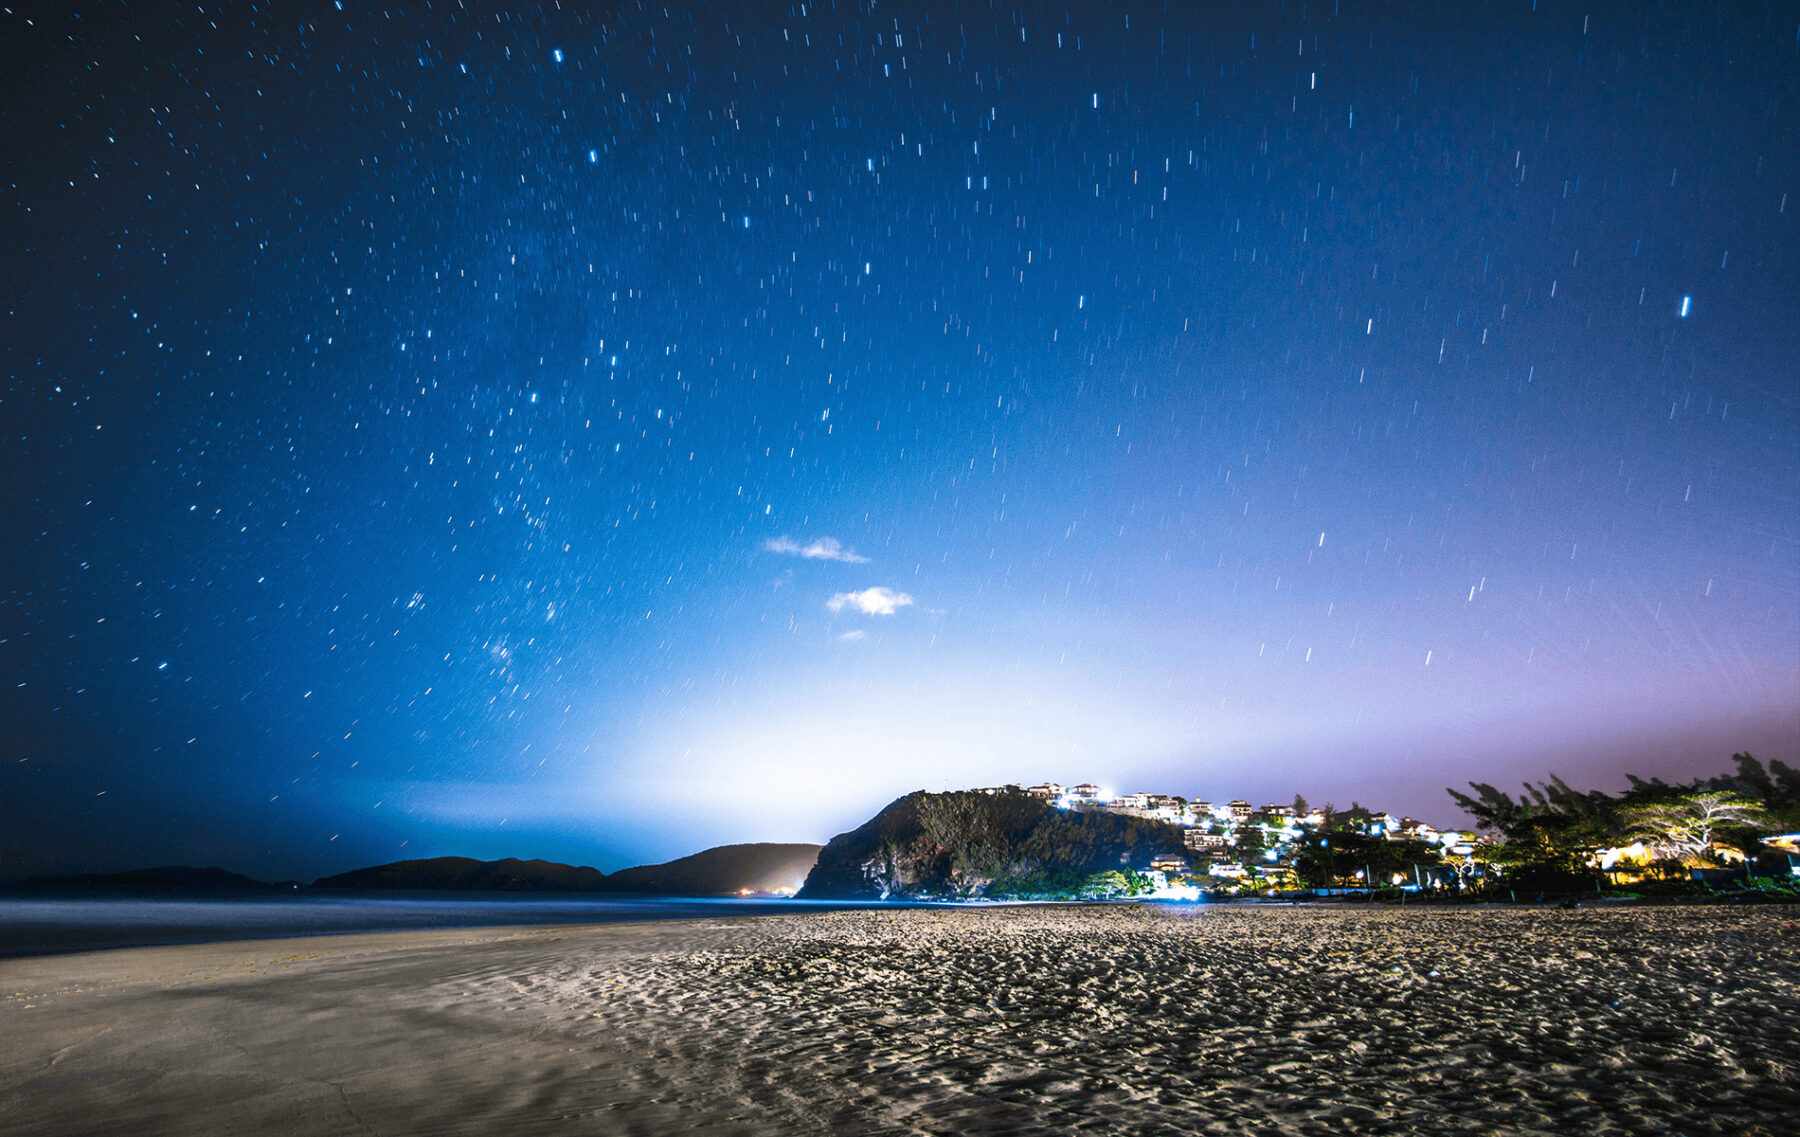 a night time view of a beach with a mountain in the background.